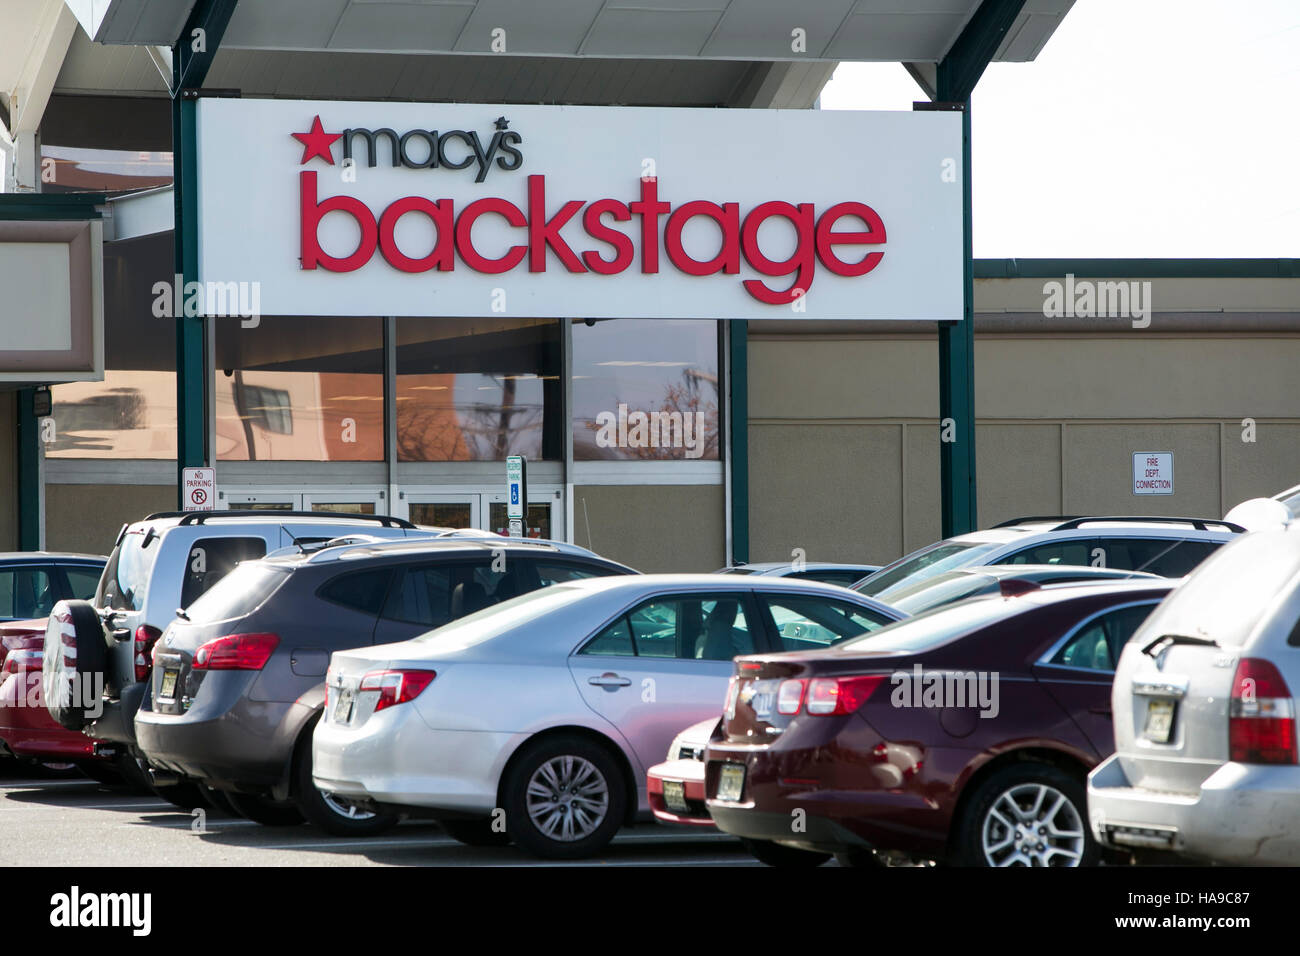 A logo sign outside of a Macy's Backstage retail store in West Orange, New Jersey on November 5, 2016. Stock Photo